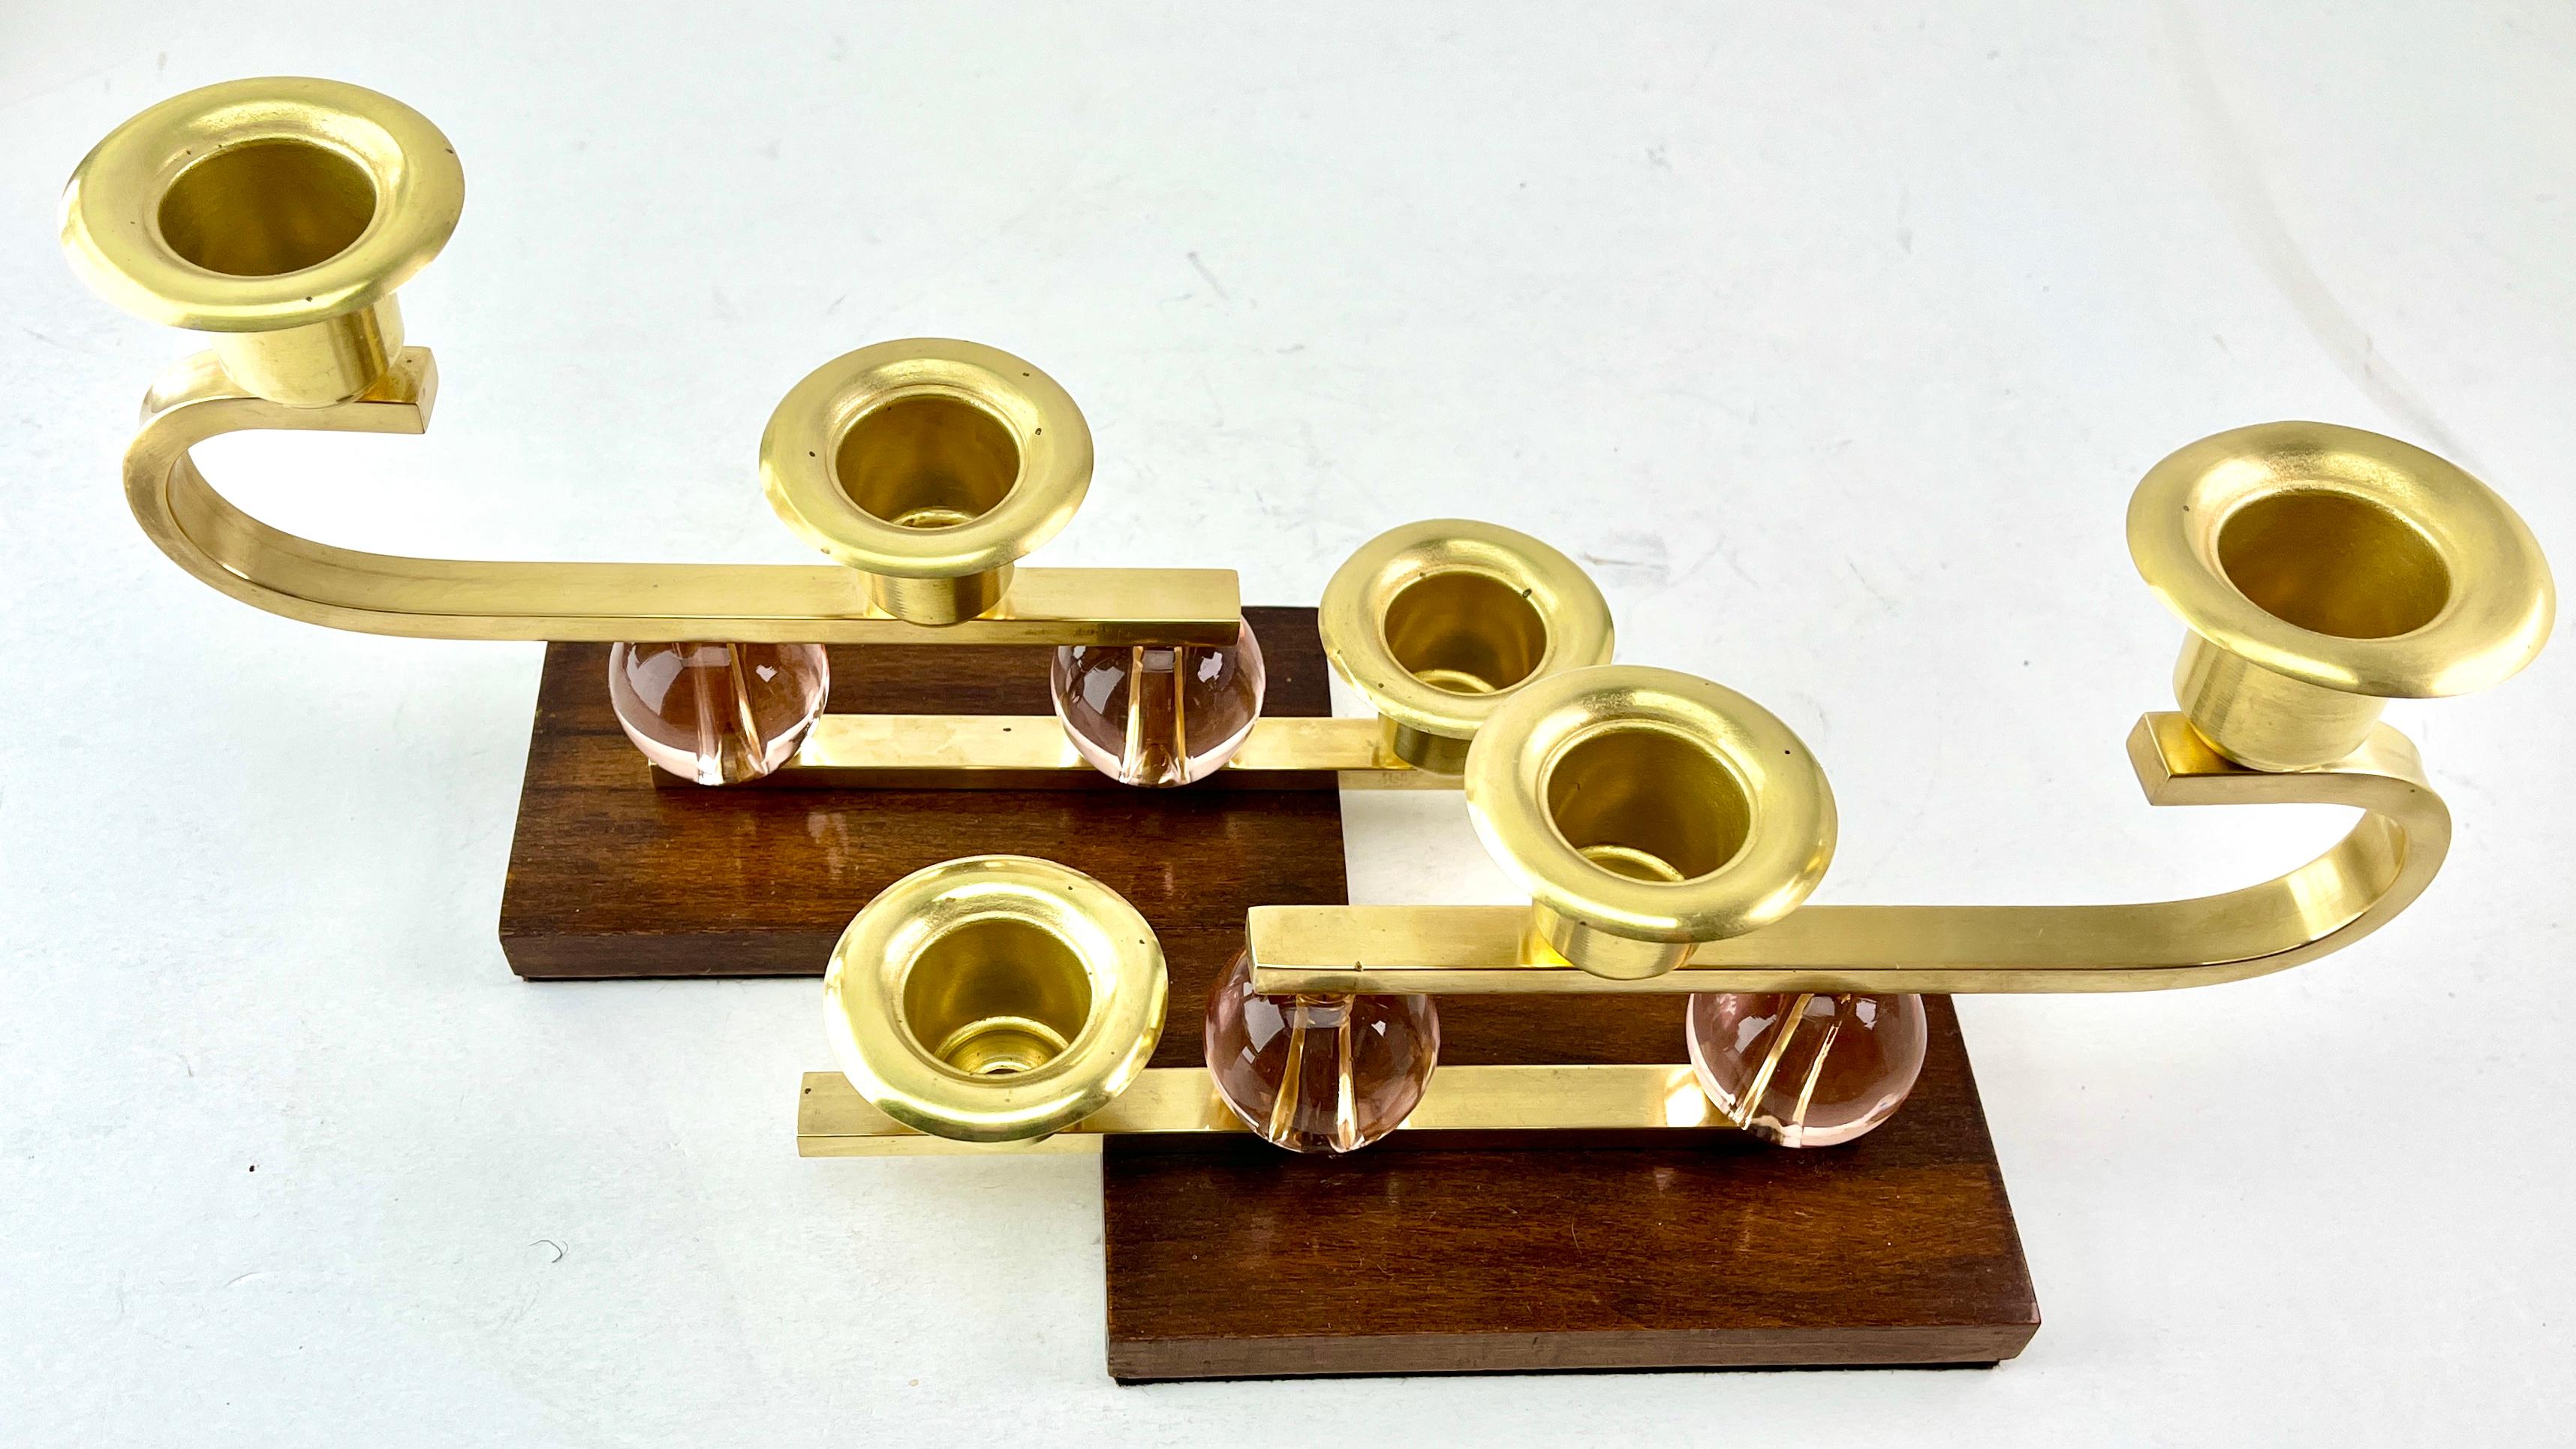 Belgian Art Deco Wooden Base and Brass Candlestick whit Glass Details, 1930s For Sale